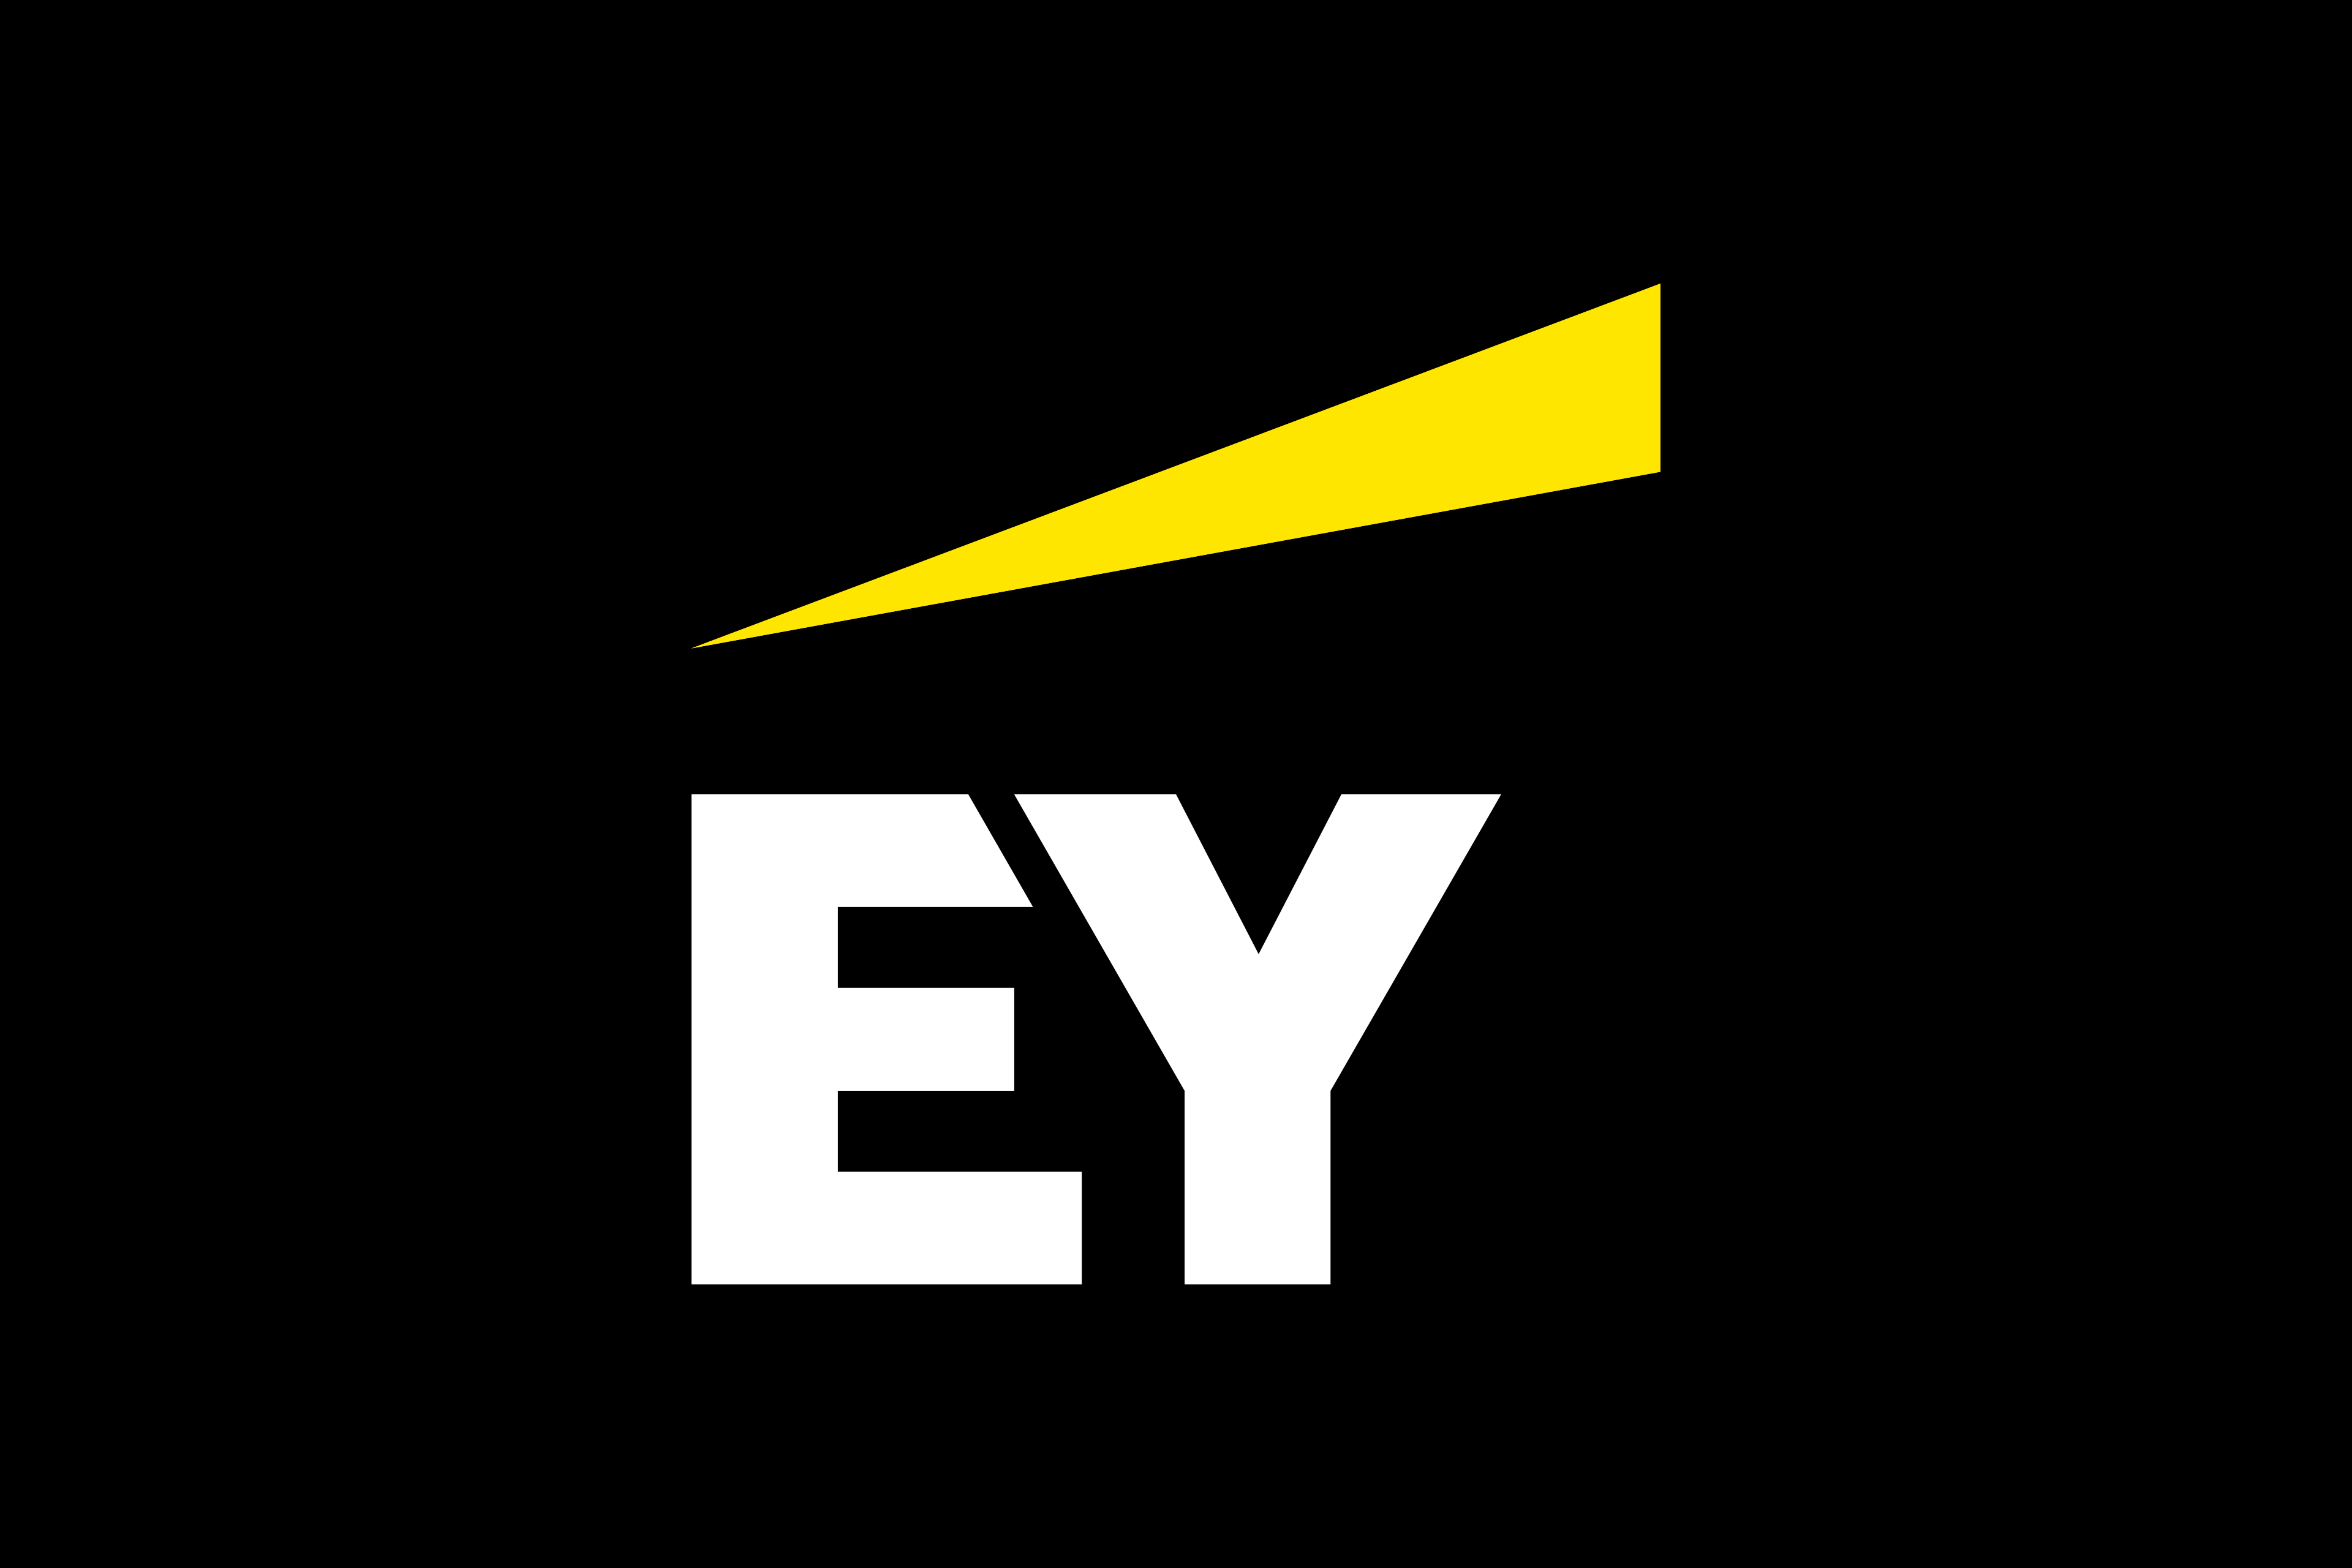 Anand Ganapathy – EY-Parthenon Americas Digital Business Building